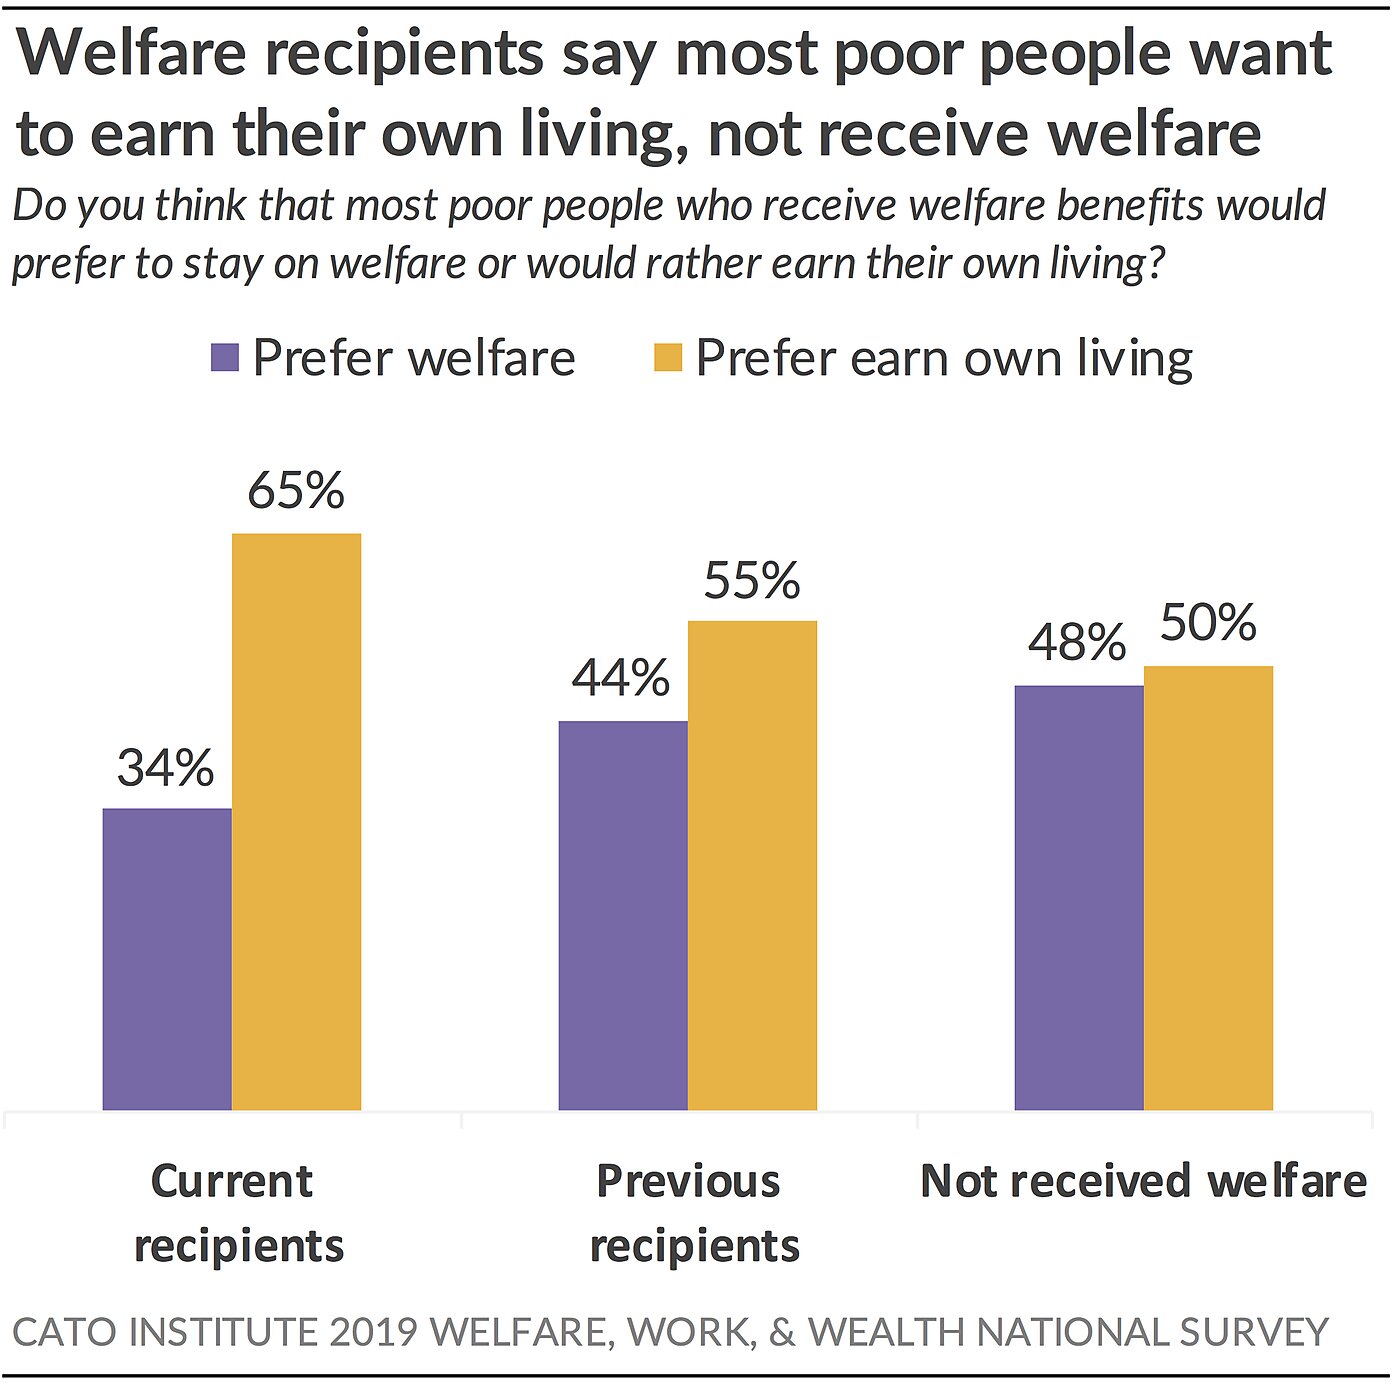 Welfare recipients say most poor people want to earn their living